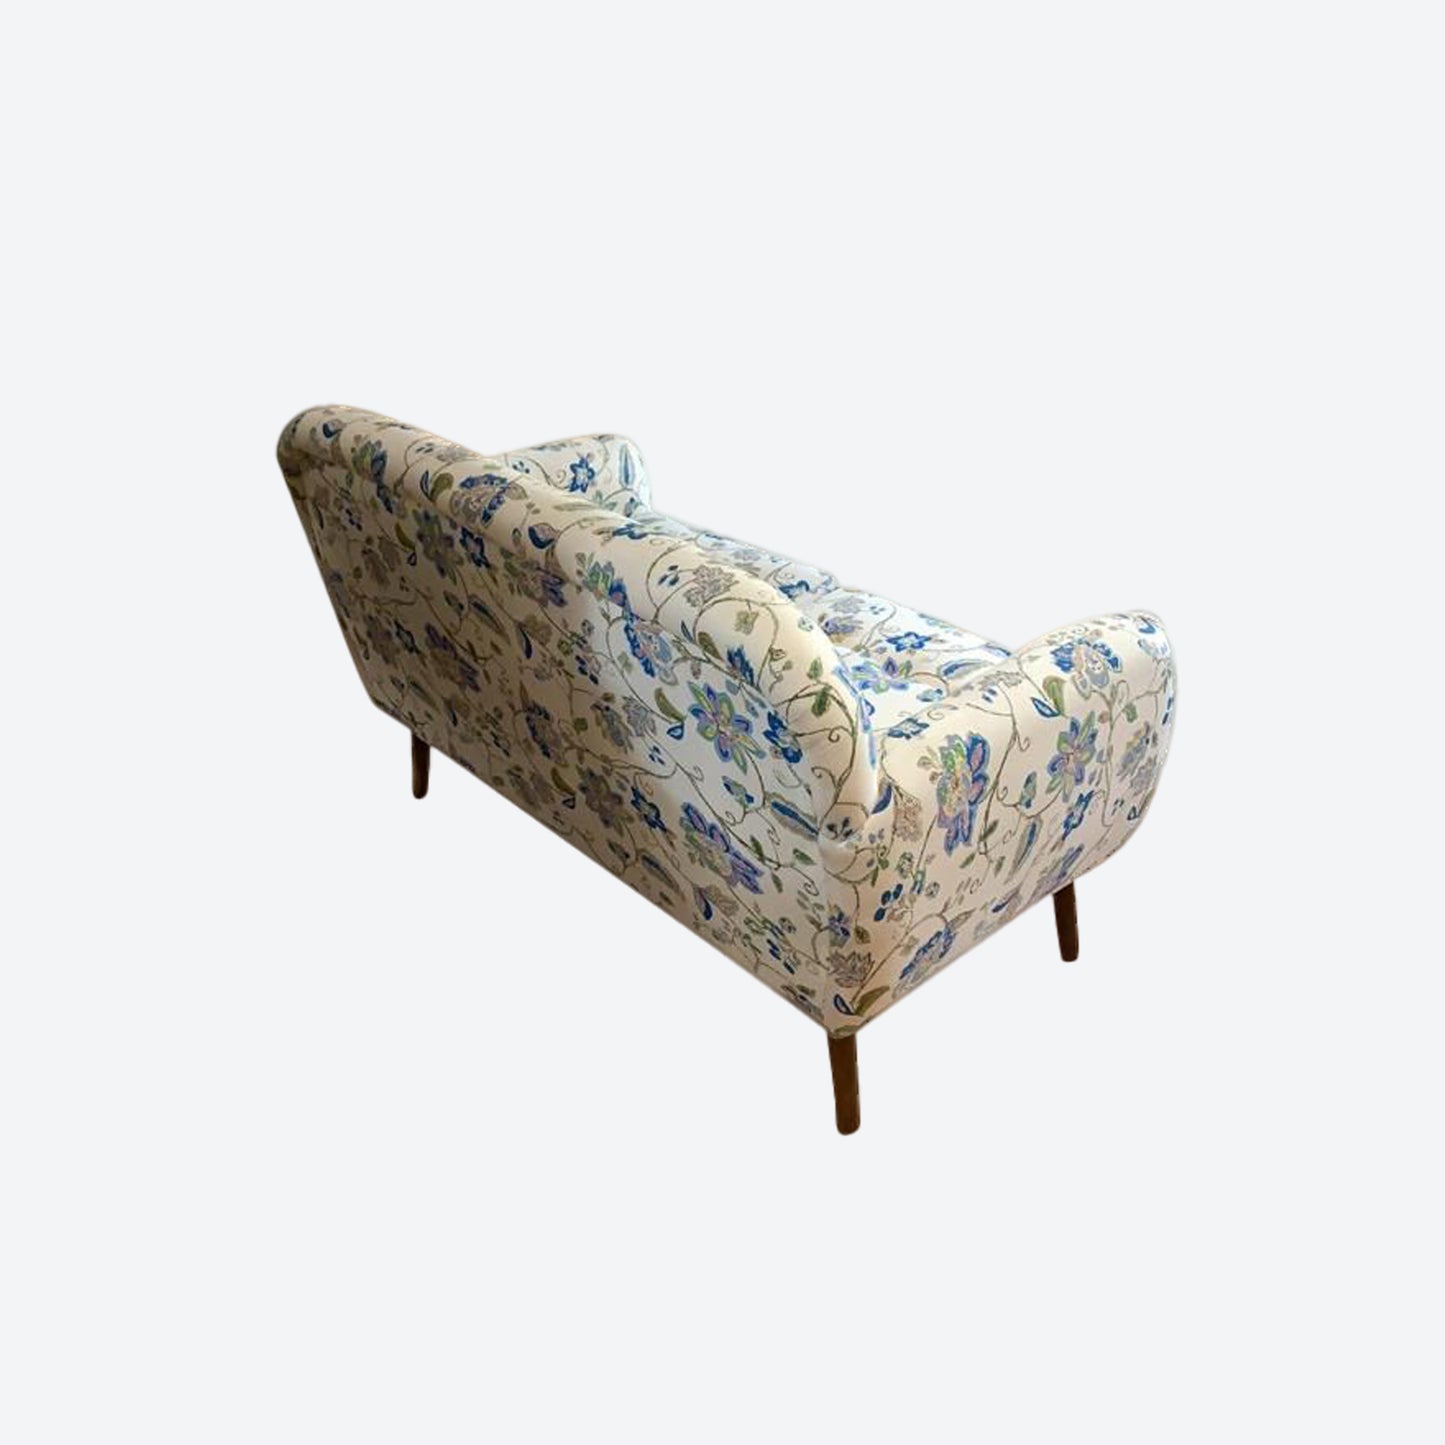 Organic CANVAS Fabric TWO SEATER SOFA WITH FLORAL PATTERN AND CEDAR WOOD LEGS -SK (SKU 1121)